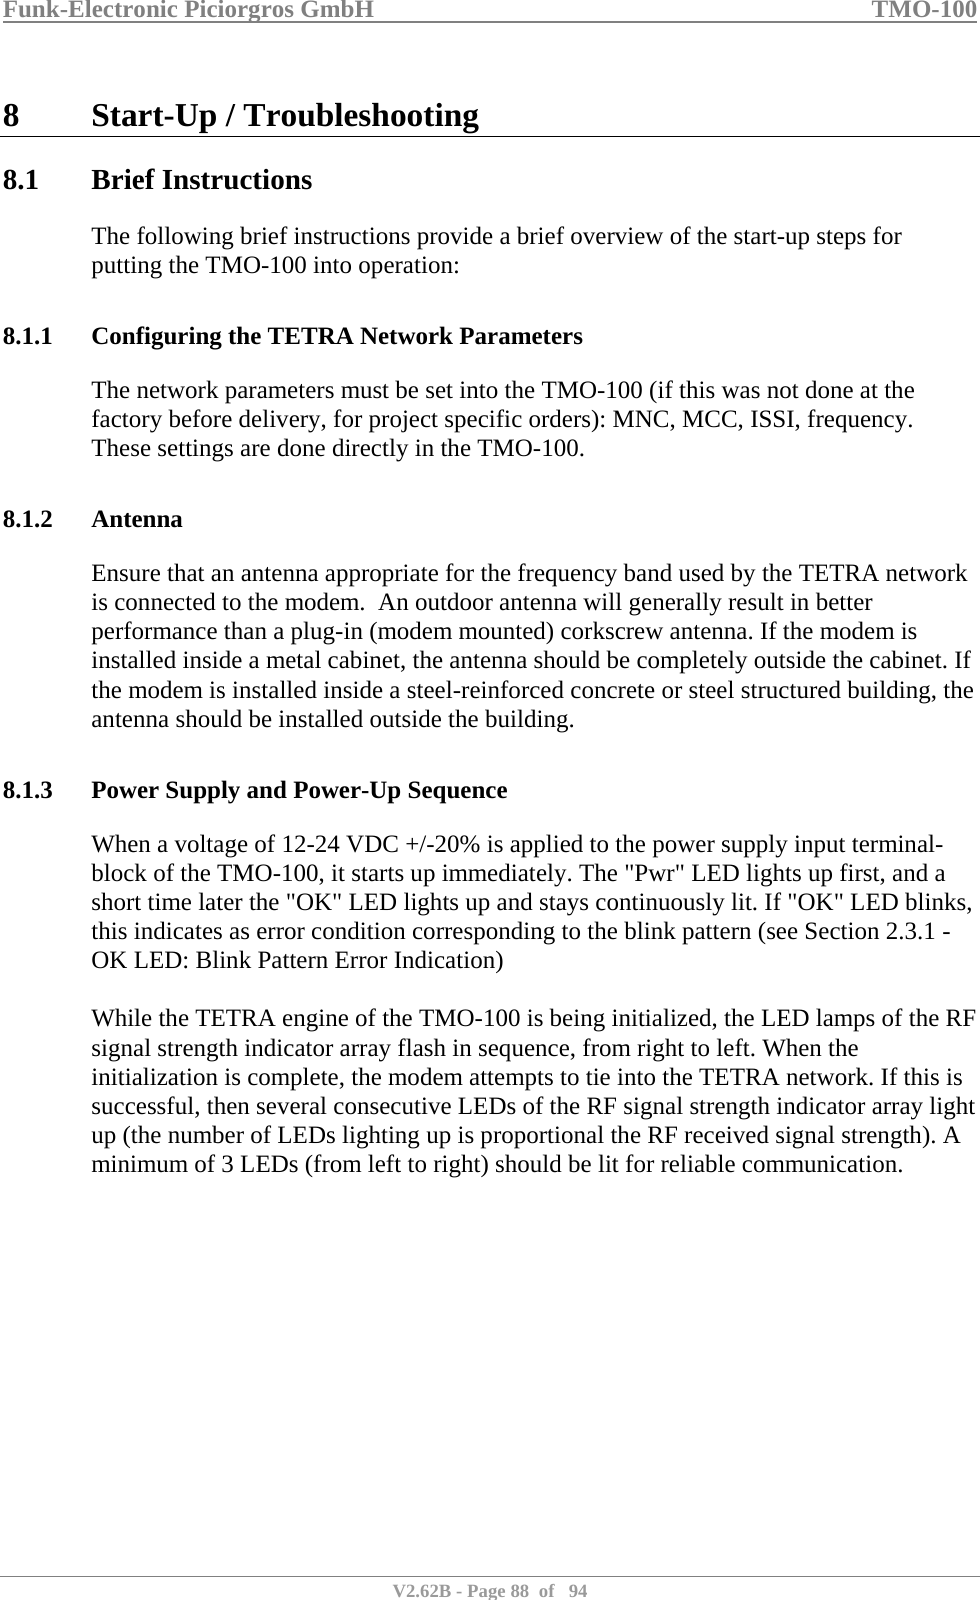 Funk-Electronic Piciorgros GmbH   TMO-100   V2.62B - Page 88  of   94   8 Start-Up / Troubleshooting 8.1 Brief Instructions The following brief instructions provide a brief overview of the start-up steps for putting the TMO-100 into operation:  8.1.1 Configuring the TETRA Network Parameters The network parameters must be set into the TMO-100 (if this was not done at the factory before delivery, for project specific orders): MNC, MCC, ISSI, frequency. These settings are done directly in the TMO-100.  8.1.2 Antenna Ensure that an antenna appropriate for the frequency band used by the TETRA network is connected to the modem.  An outdoor antenna will generally result in better performance than a plug-in (modem mounted) corkscrew antenna. If the modem is installed inside a metal cabinet, the antenna should be completely outside the cabinet. If the modem is installed inside a steel-reinforced concrete or steel structured building, the antenna should be installed outside the building.  8.1.3 Power Supply and Power-Up Sequence When a voltage of 12-24 VDC +/-20% is applied to the power supply input terminal-block of the TMO-100, it starts up immediately. The &quot;Pwr&quot; LED lights up first, and a short time later the &quot;OK&quot; LED lights up and stays continuously lit. If &quot;OK&quot; LED blinks, this indicates as error condition corresponding to the blink pattern (see Section 2.3.1 - OK LED: Blink Pattern Error Indication)  While the TETRA engine of the TMO-100 is being initialized, the LED lamps of the RF signal strength indicator array flash in sequence, from right to left. When the initialization is complete, the modem attempts to tie into the TETRA network. If this is successful, then several consecutive LEDs of the RF signal strength indicator array light up (the number of LEDs lighting up is proportional the RF received signal strength). A minimum of 3 LEDs (from left to right) should be lit for reliable communication.  